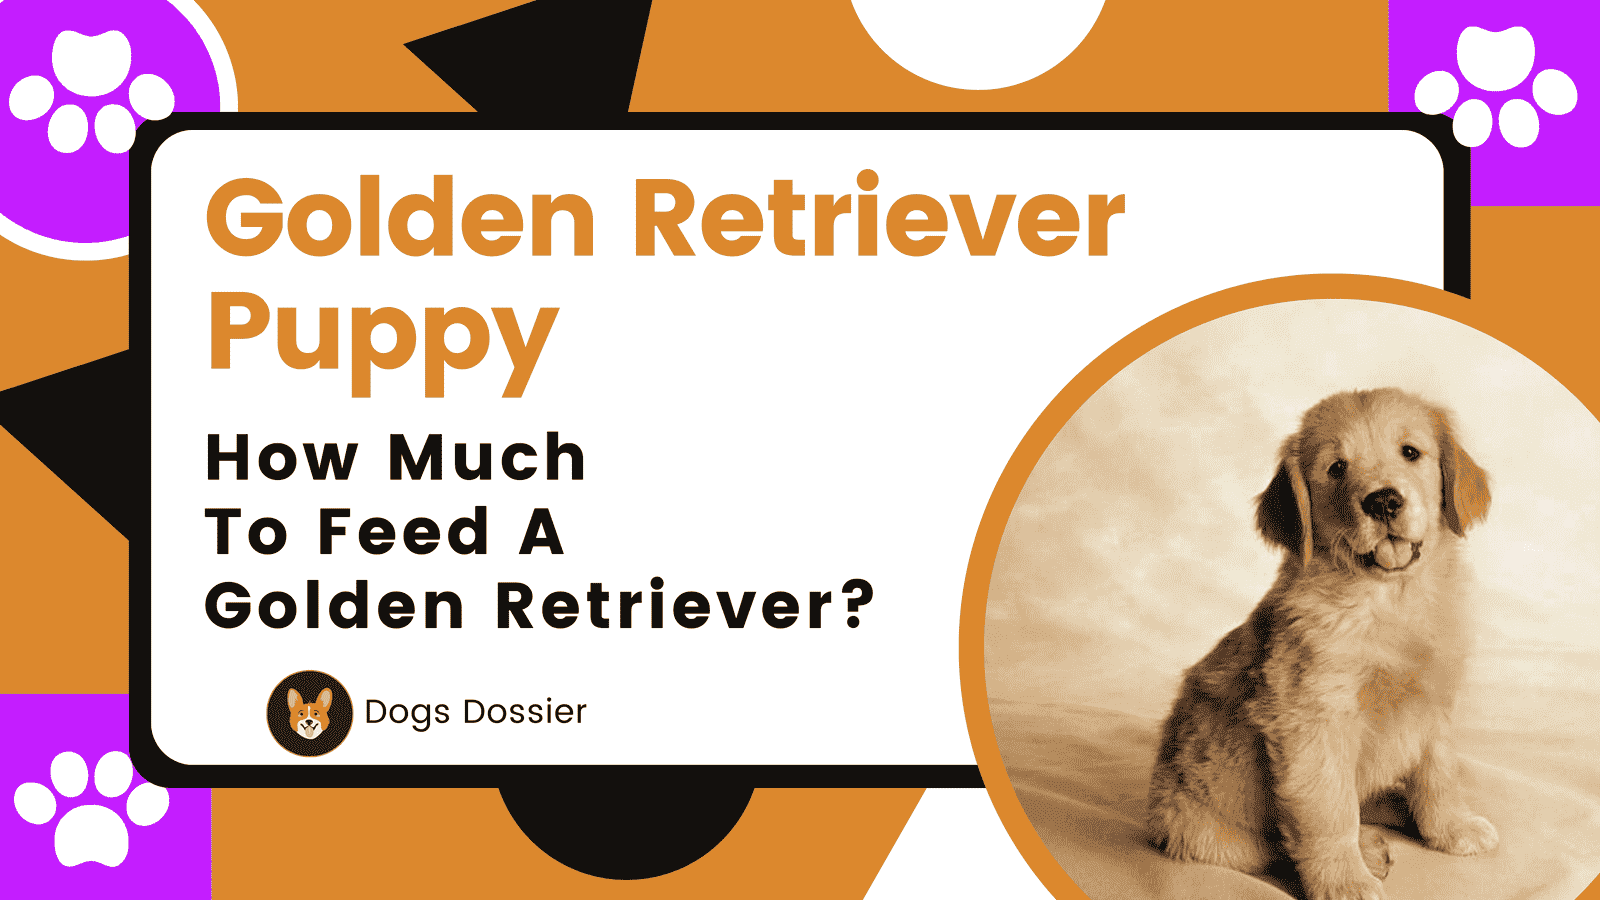 How Much To Feed a Golden Retriever Puppy?